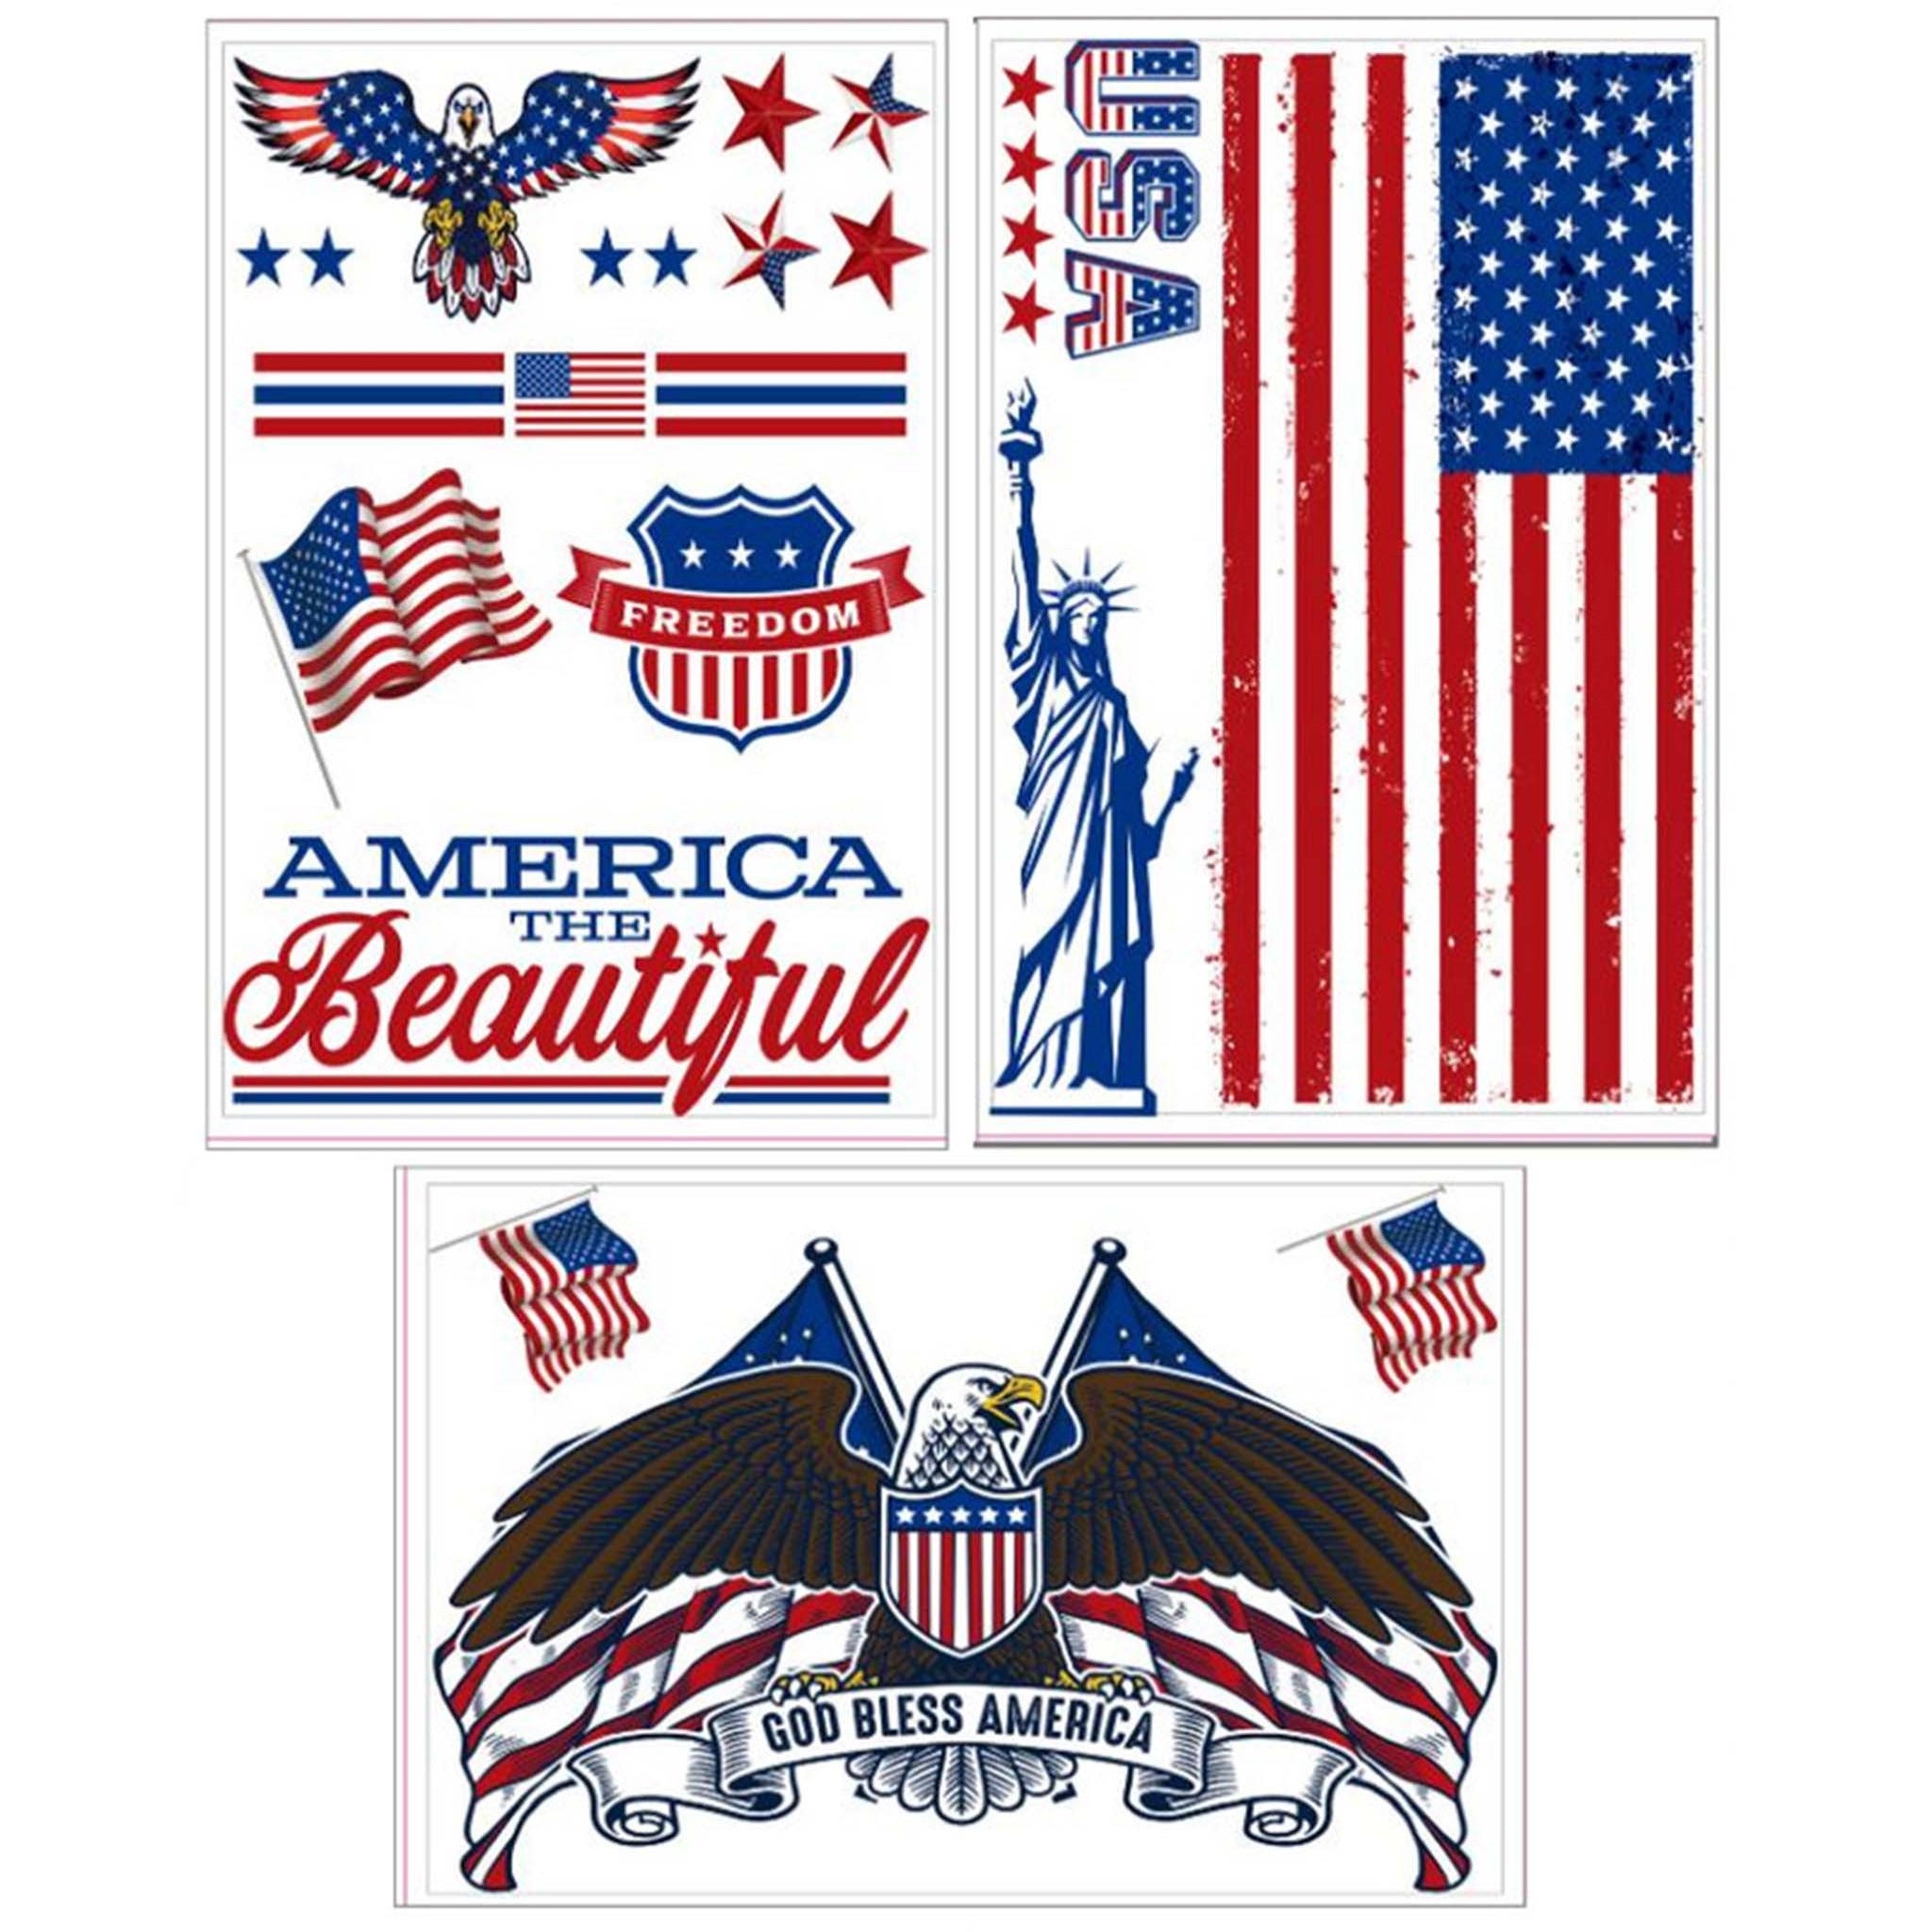 Three sheets of small rub-on transfers against a white background featuring 3 unique designs, including American flags, the Statue of Liberty, bald eagles, and patriotic quotes, all in red, white, and blue. 